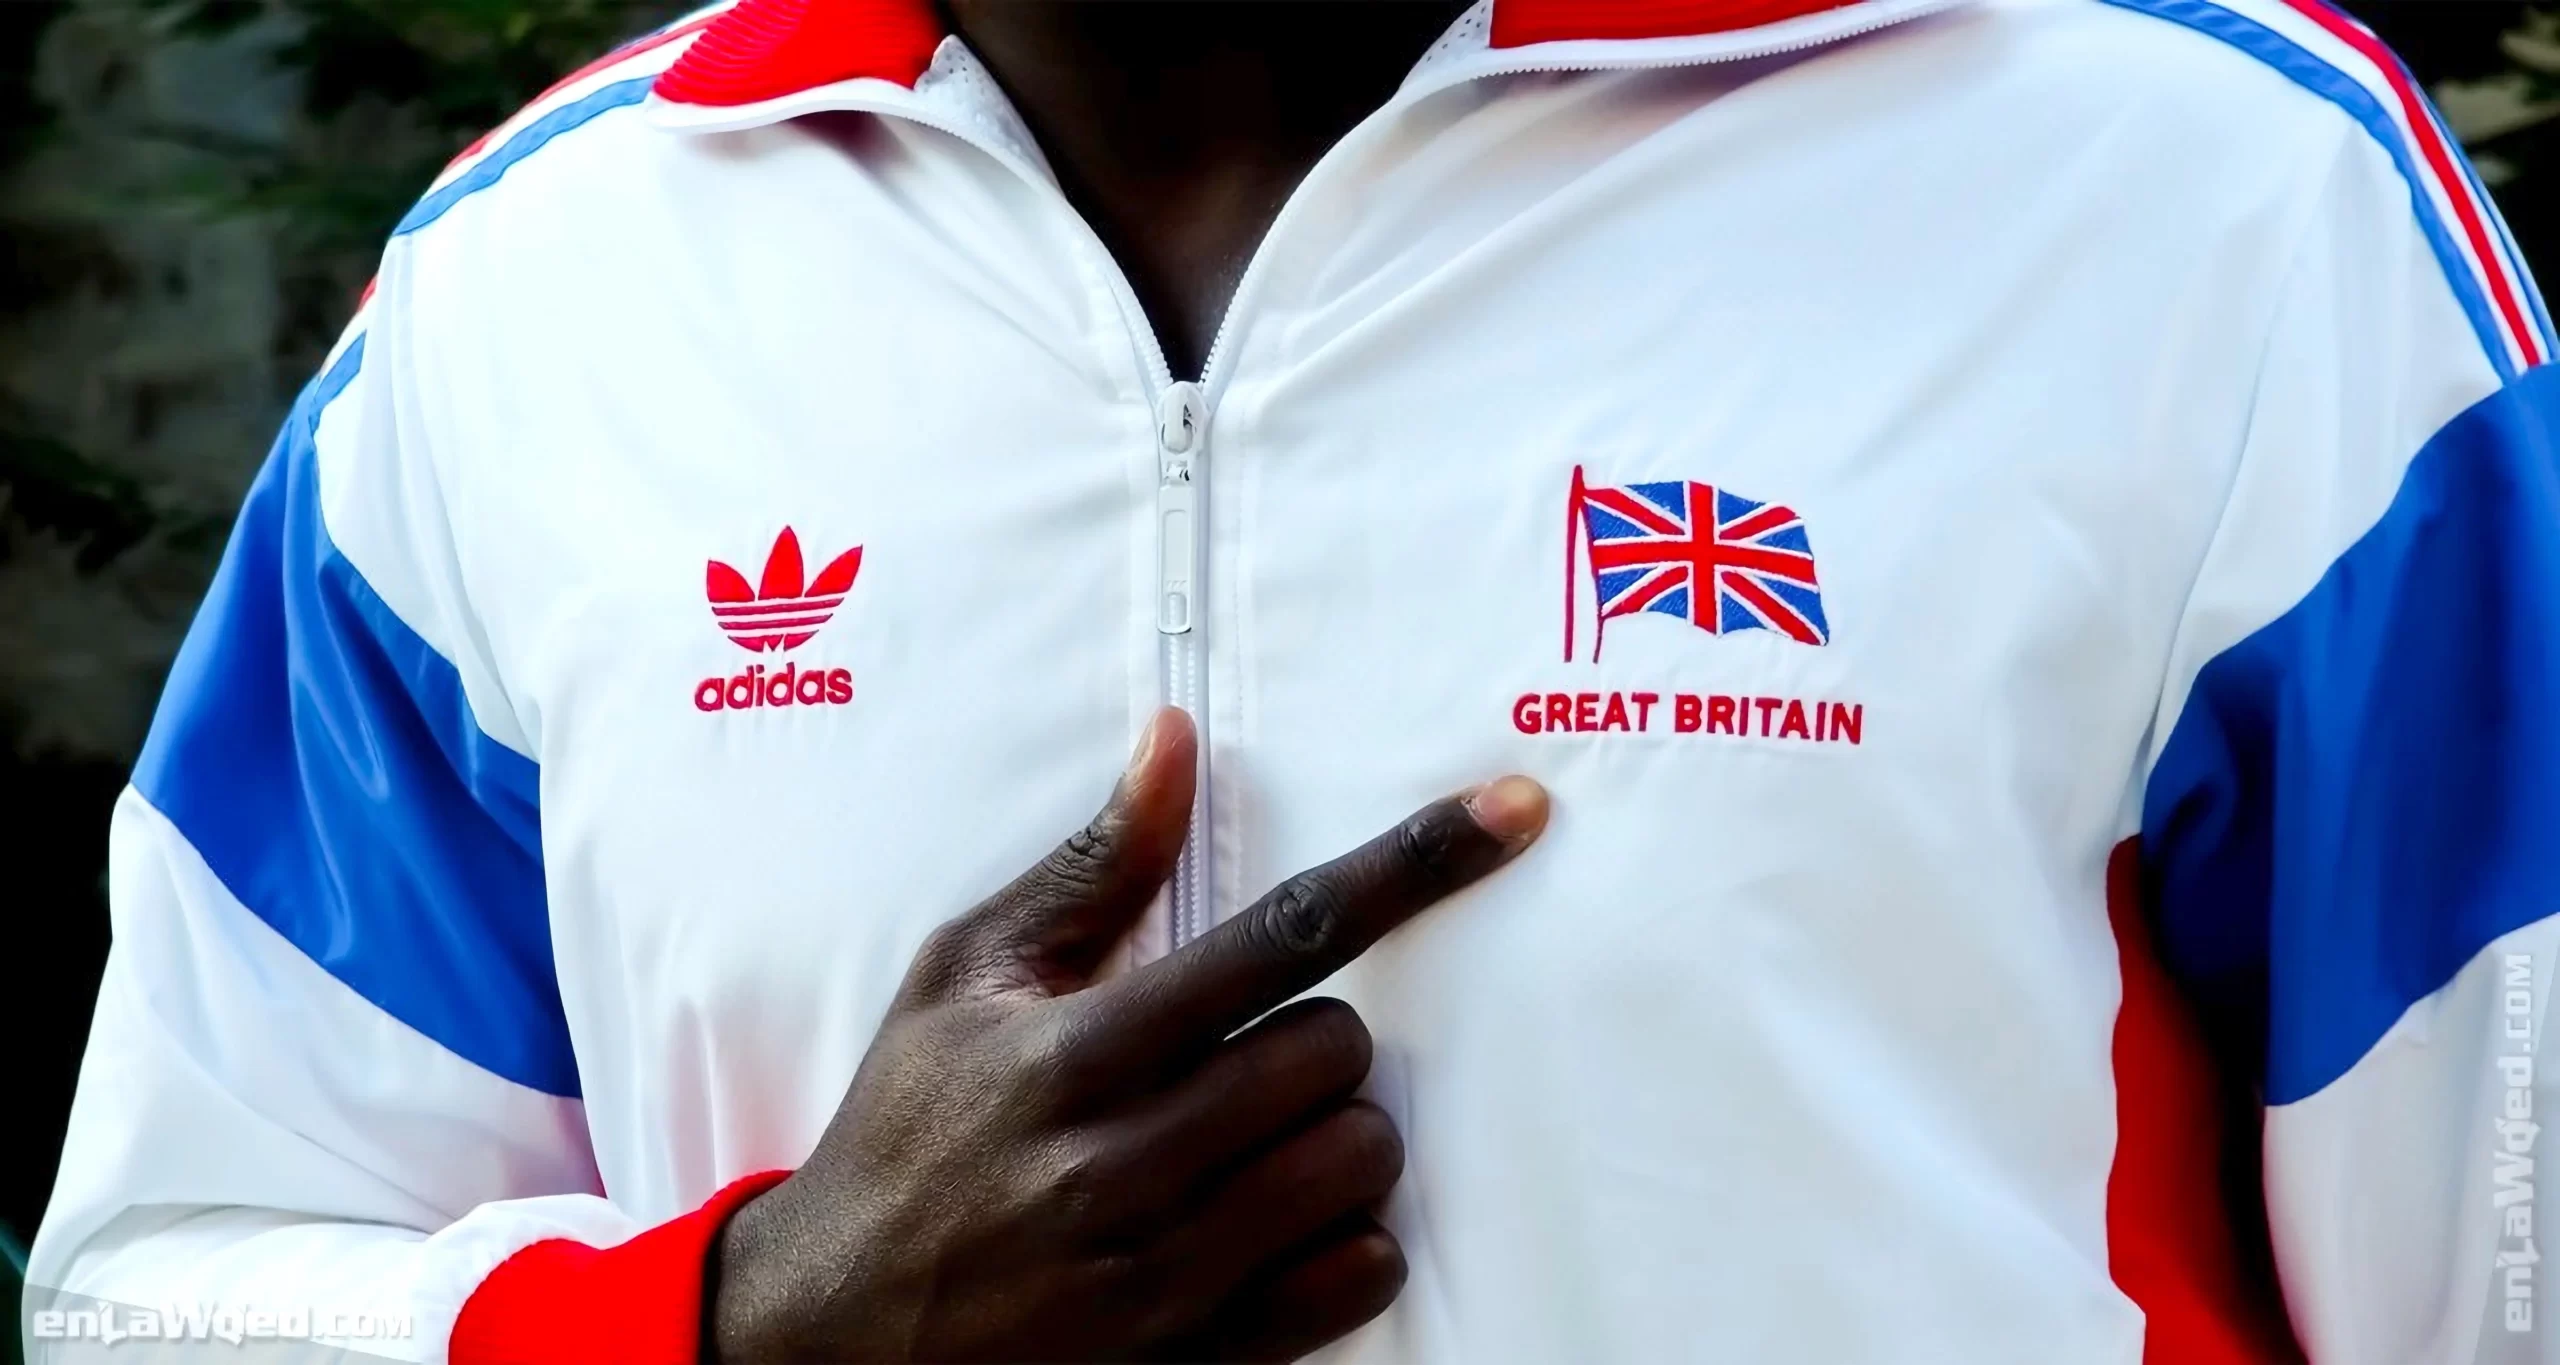 Men’s 2005 Great Britain Olympic ’84 TT by Adidas: Supported (EnLawded.com file #lmcen3xcggx3lby3r8w)